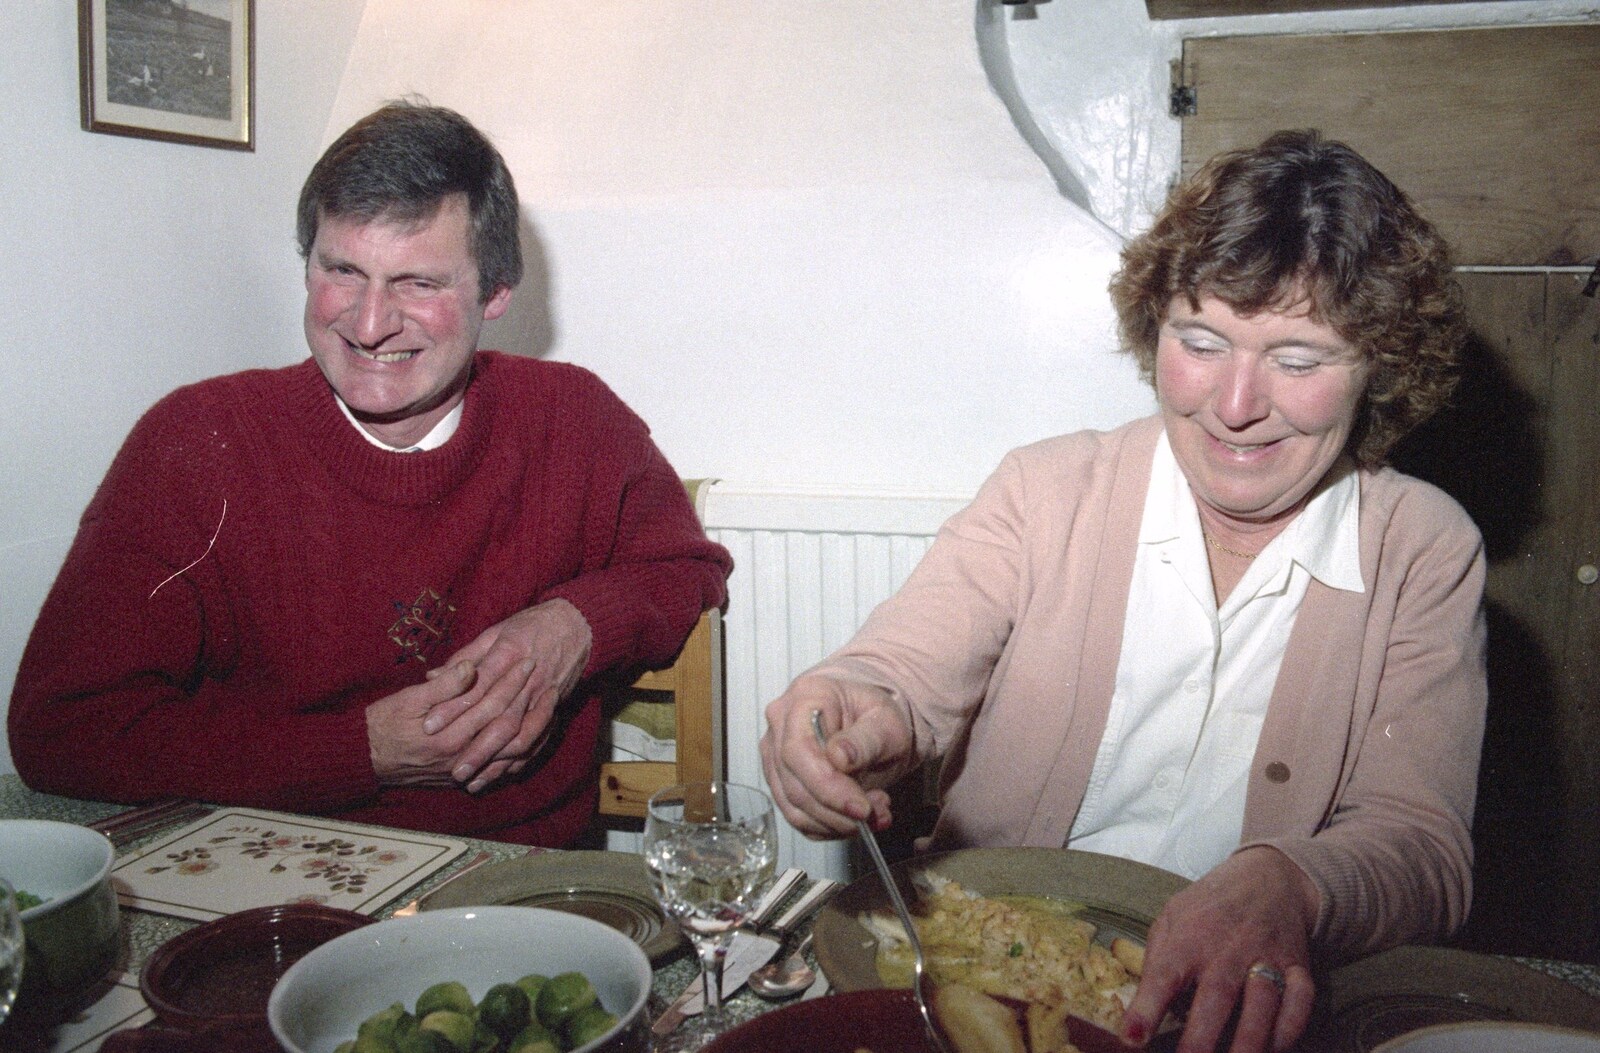 Geoff and Brenda, with some roast dinner from Lunch and Dinner at Mad Sue's, Stuston, Suffolk - 30th March 1995